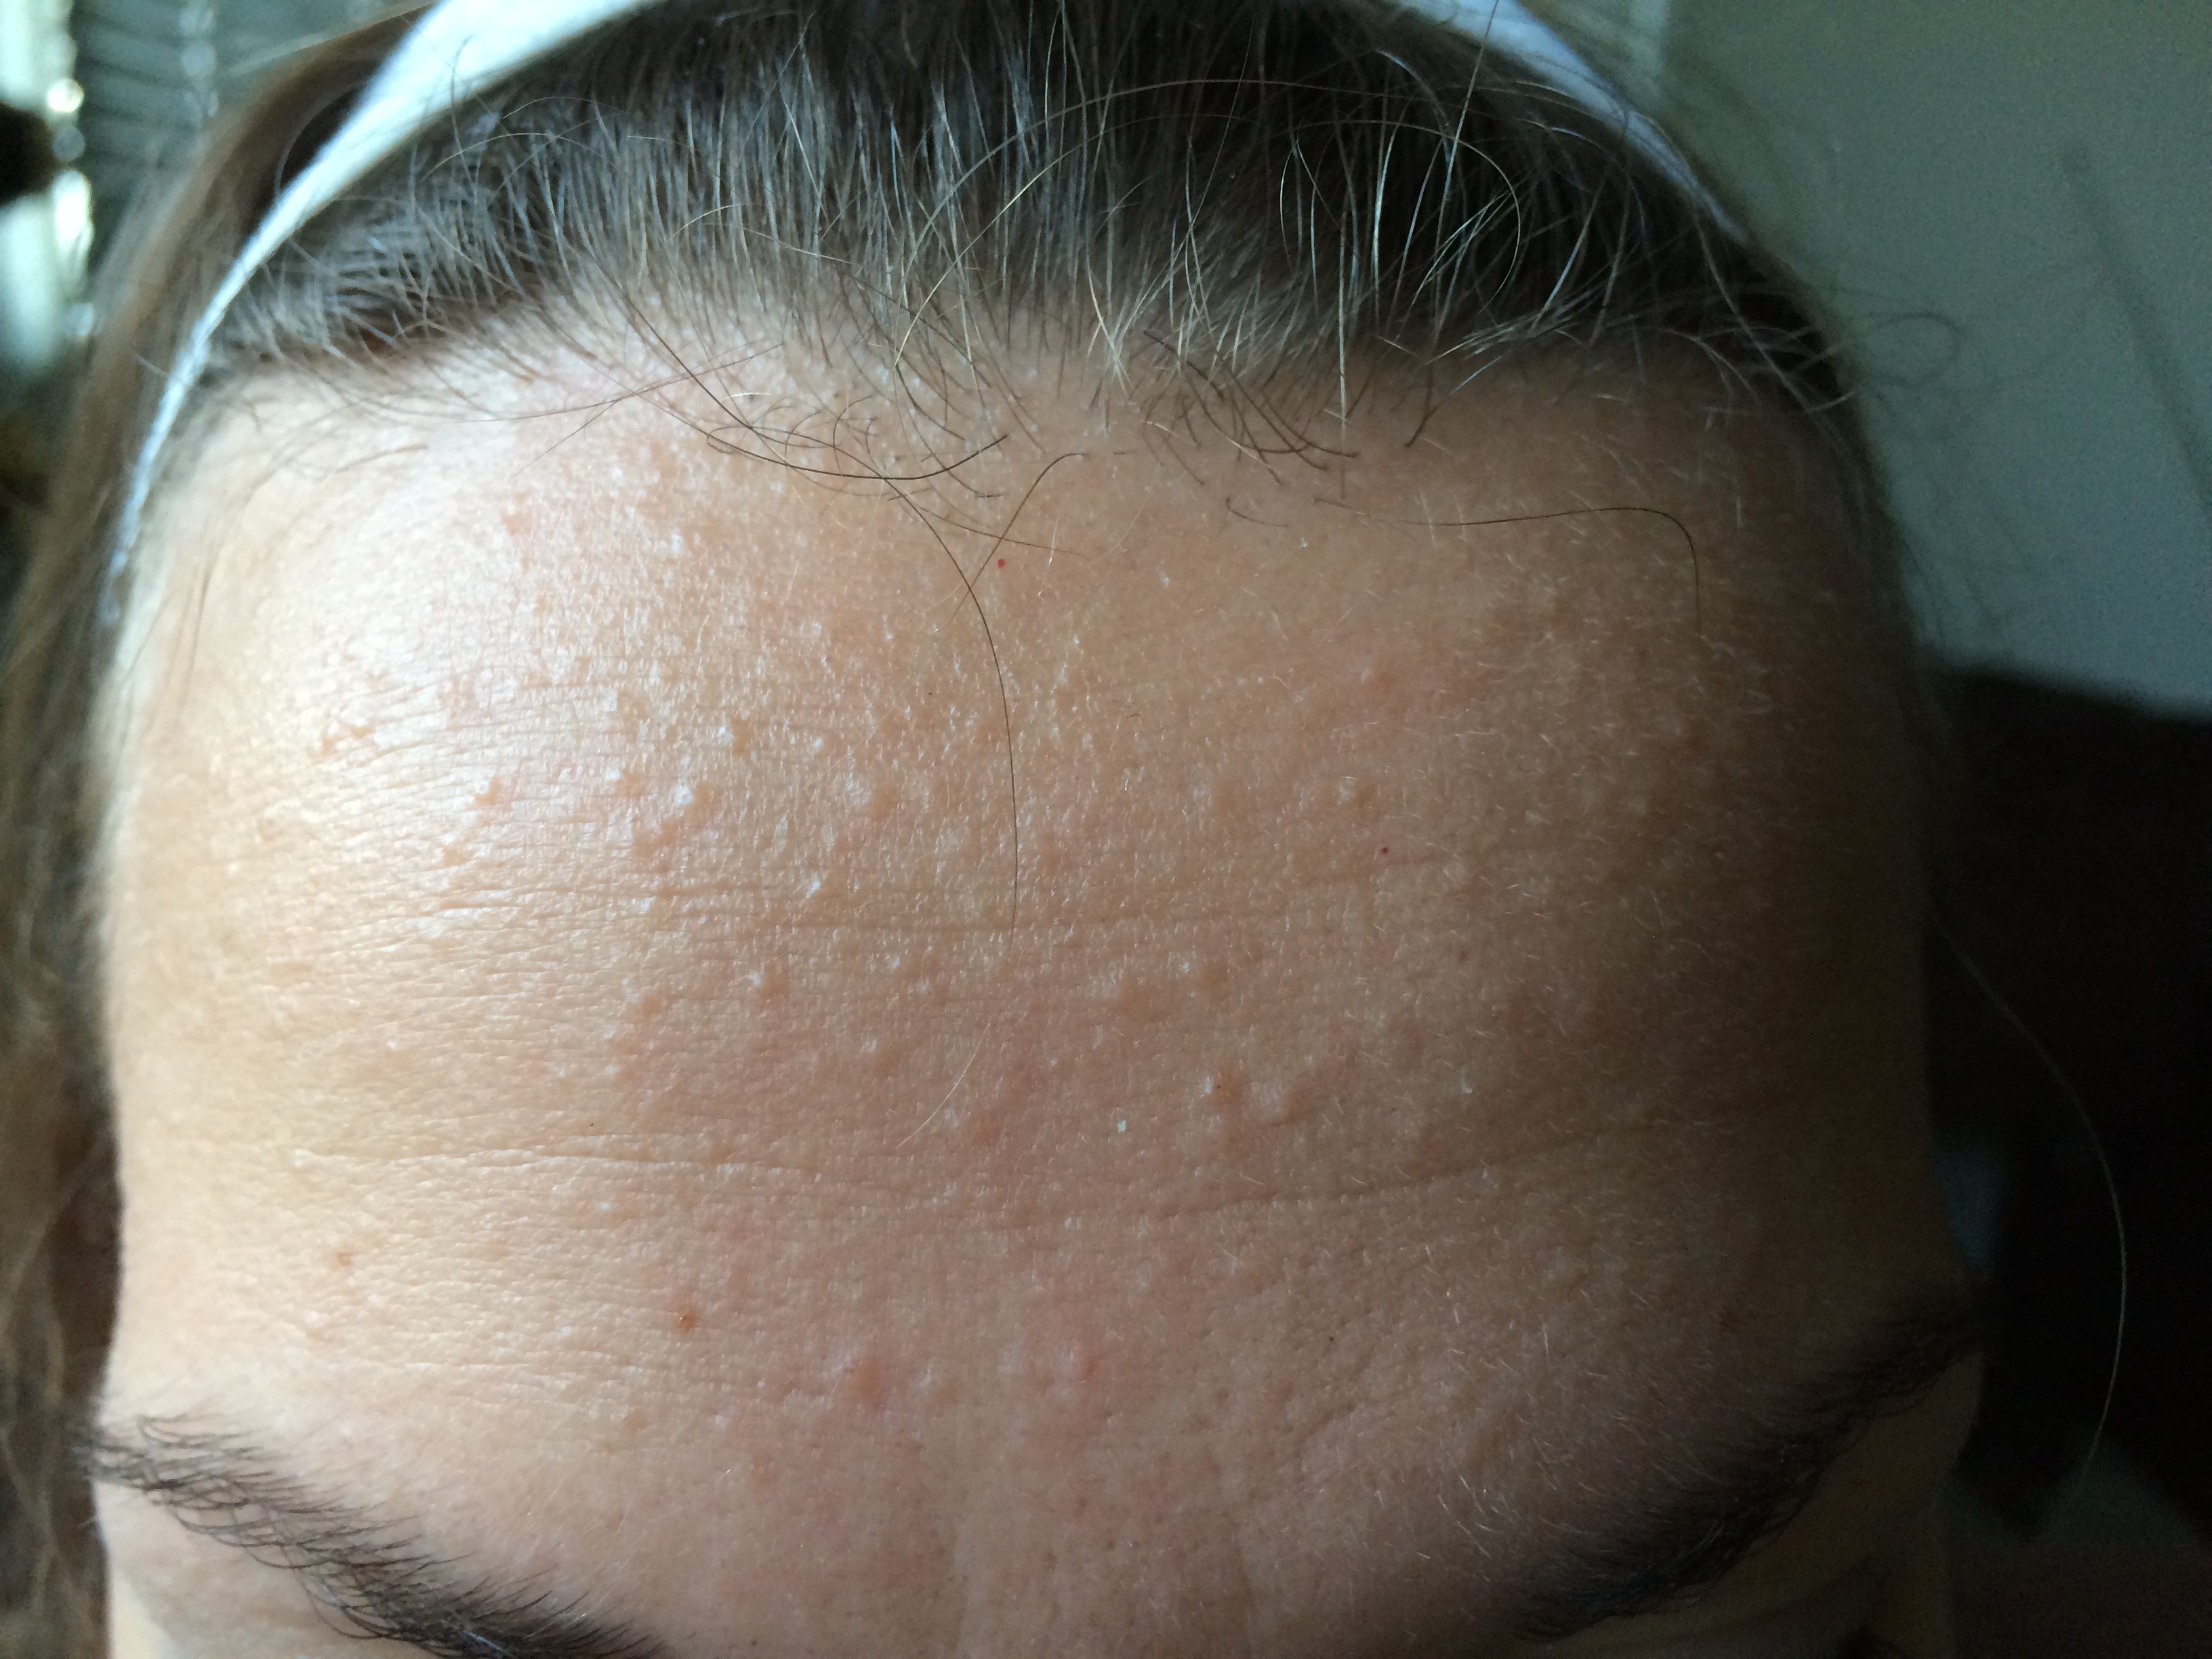 Small Pimples On Forehead Won T Go Away 9 Pictures Of Bumps On Your